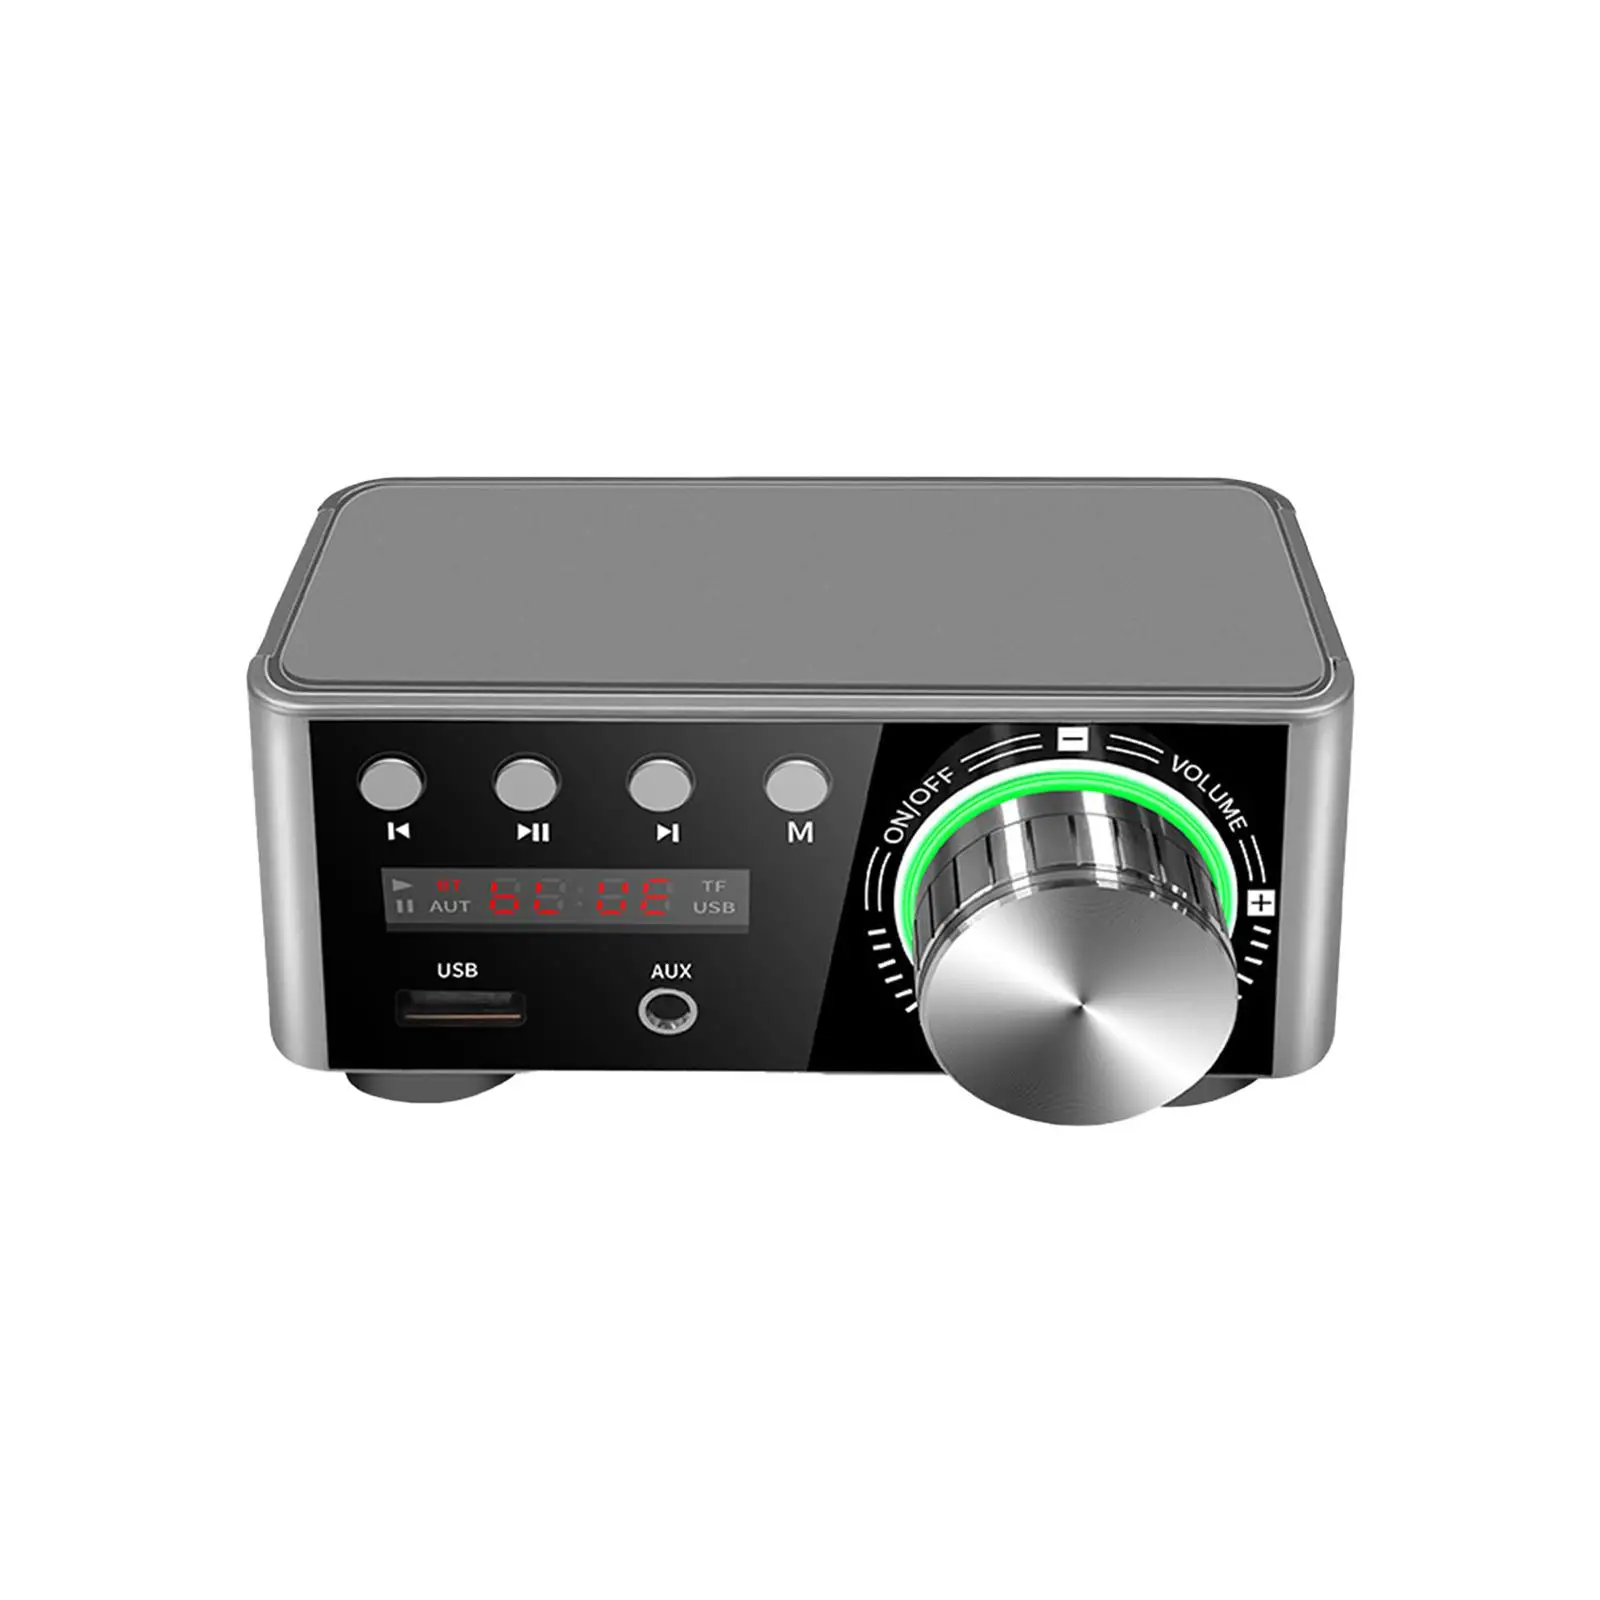 Audio Power Amplifier with Audio Cable Class D MP3 Dual Channel for Car Home Bar Party Mini HiFi Stereo Amp Speaker 9V-24V US